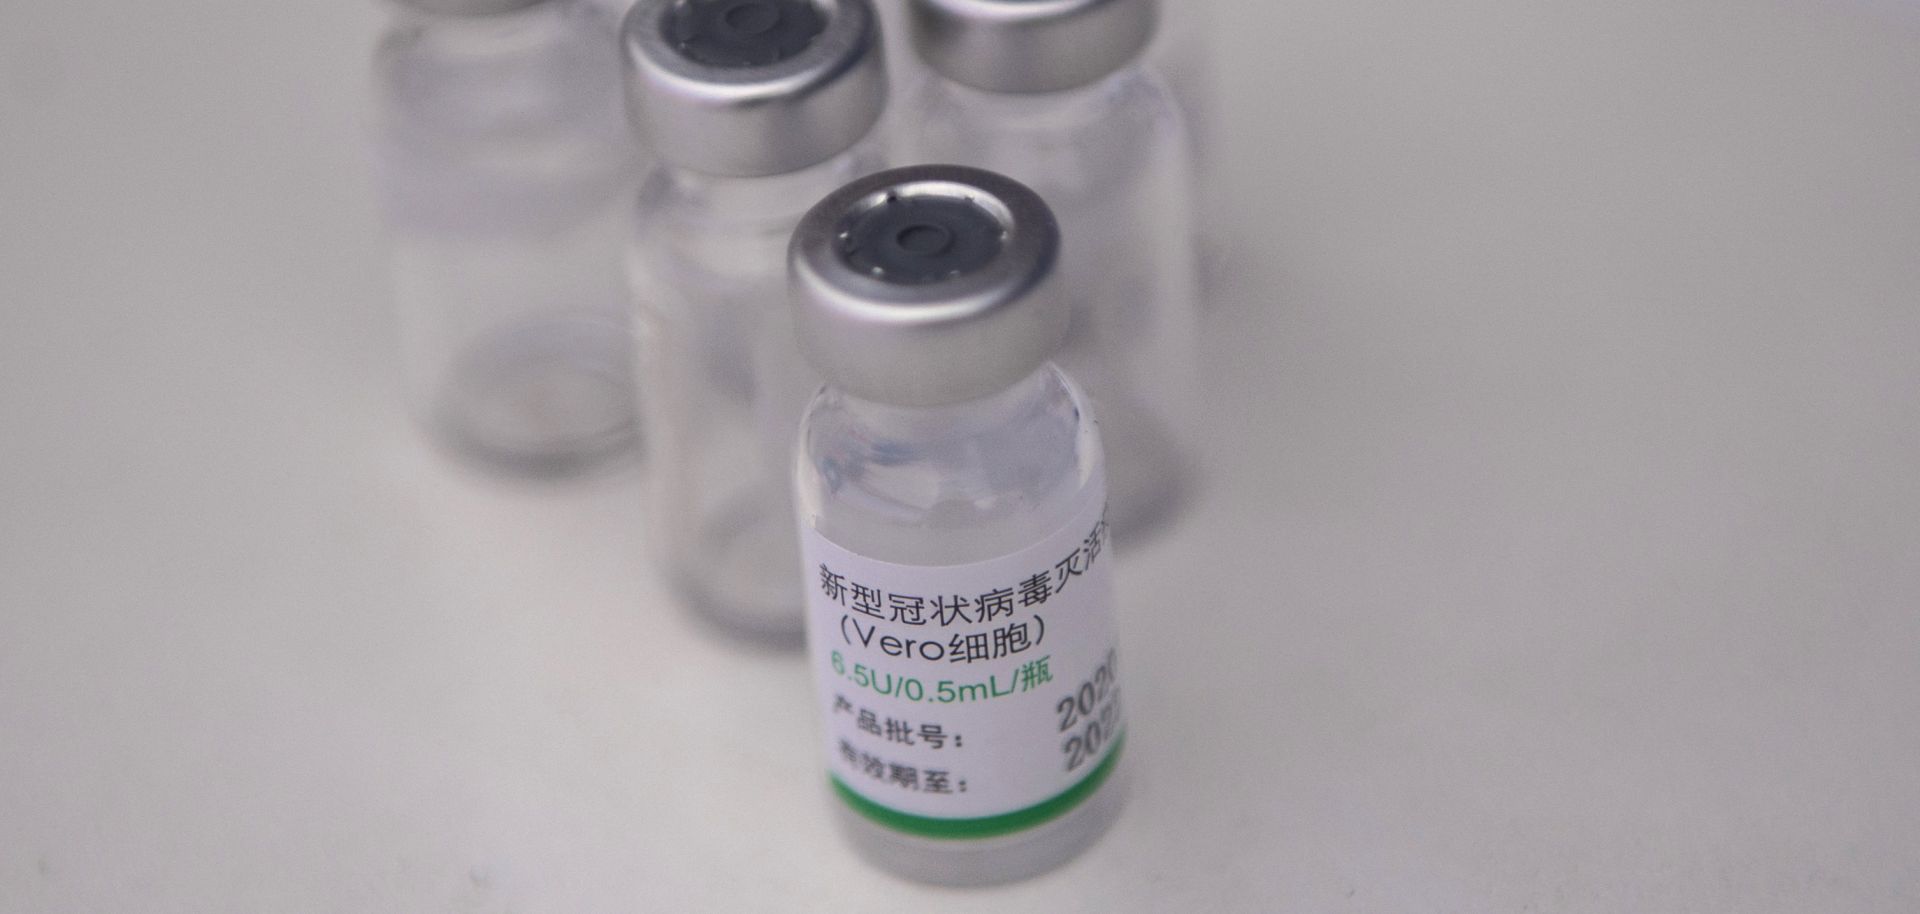 Picture of vials of the vaccine developed by Sinopharm of China against COVID-19 taken during a health workers vaccination campaign amid the novel coronavirus pandemic, in Ate, a district in Lima